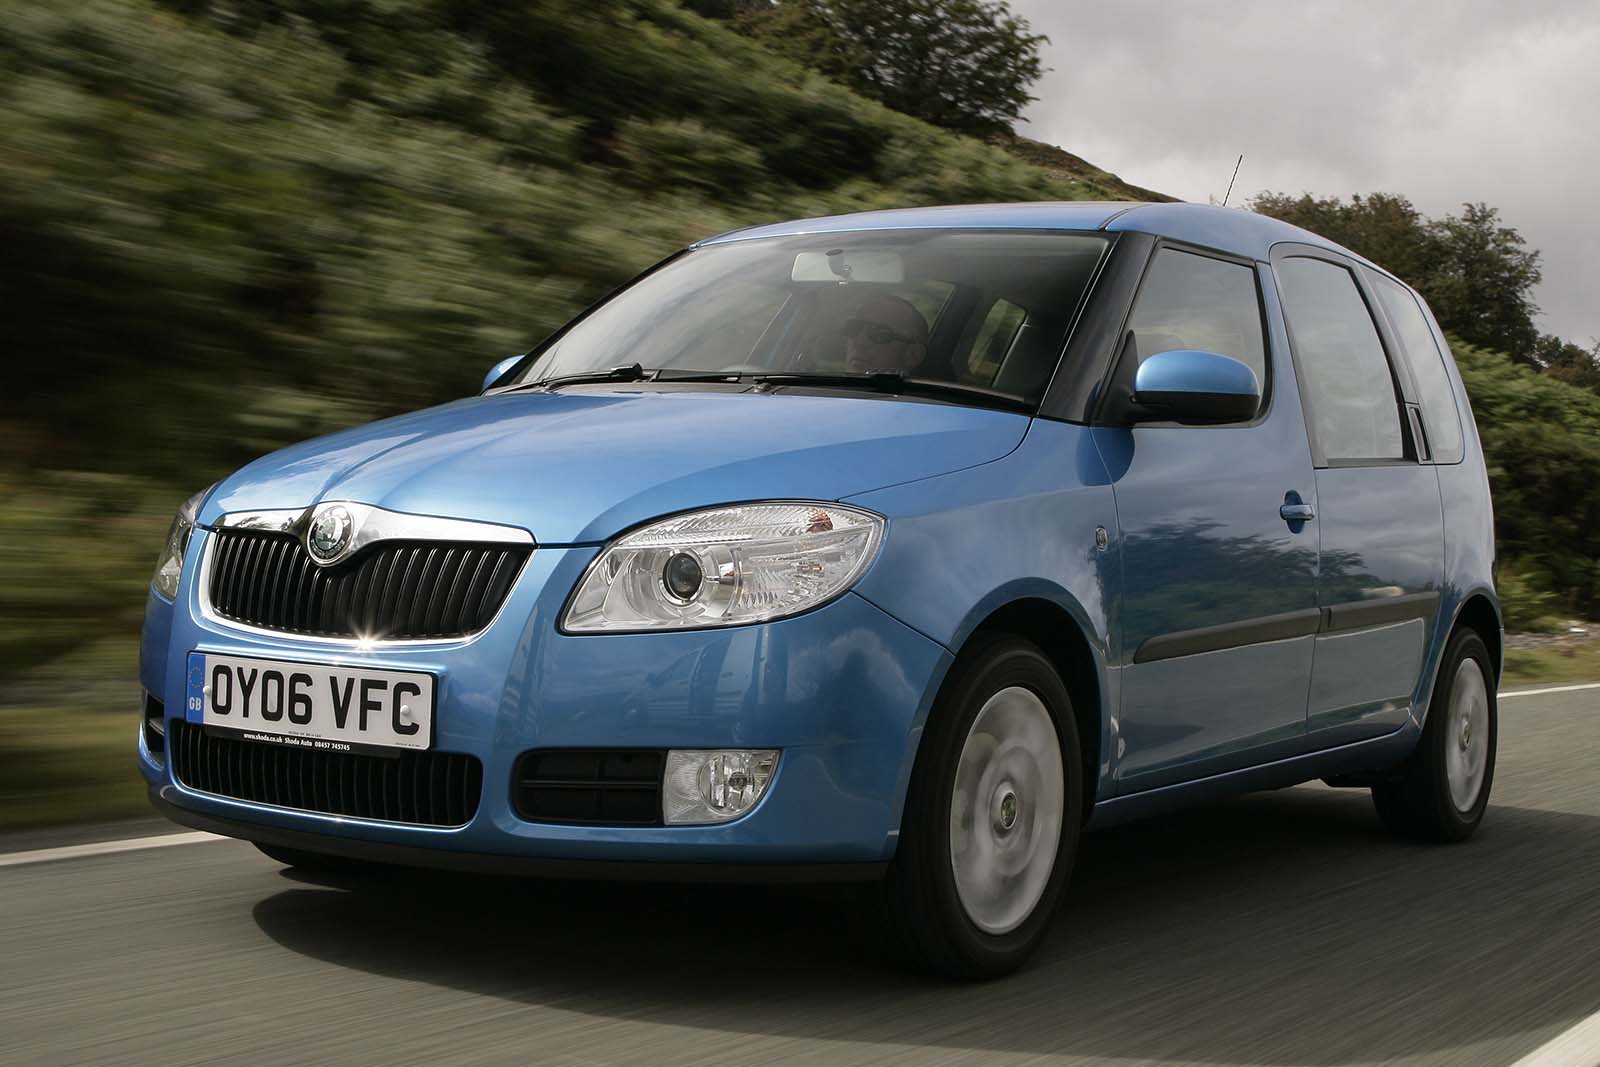 Skoda Roomster review (2006- on)